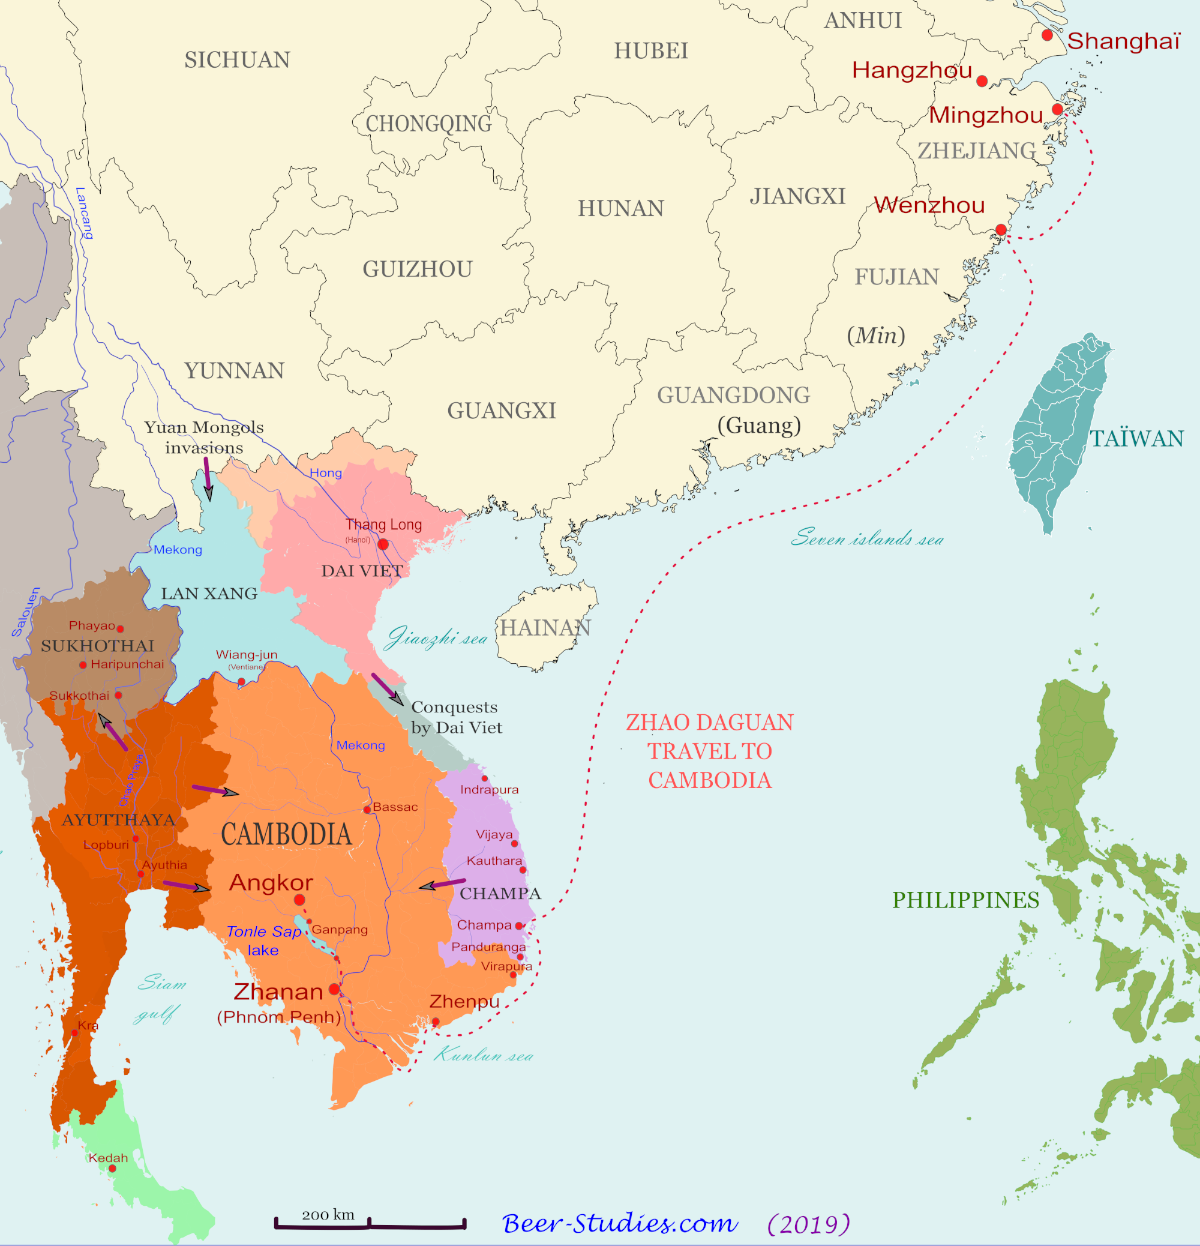 The Khmer empire in 13th century and Zhou Daguan's embassy